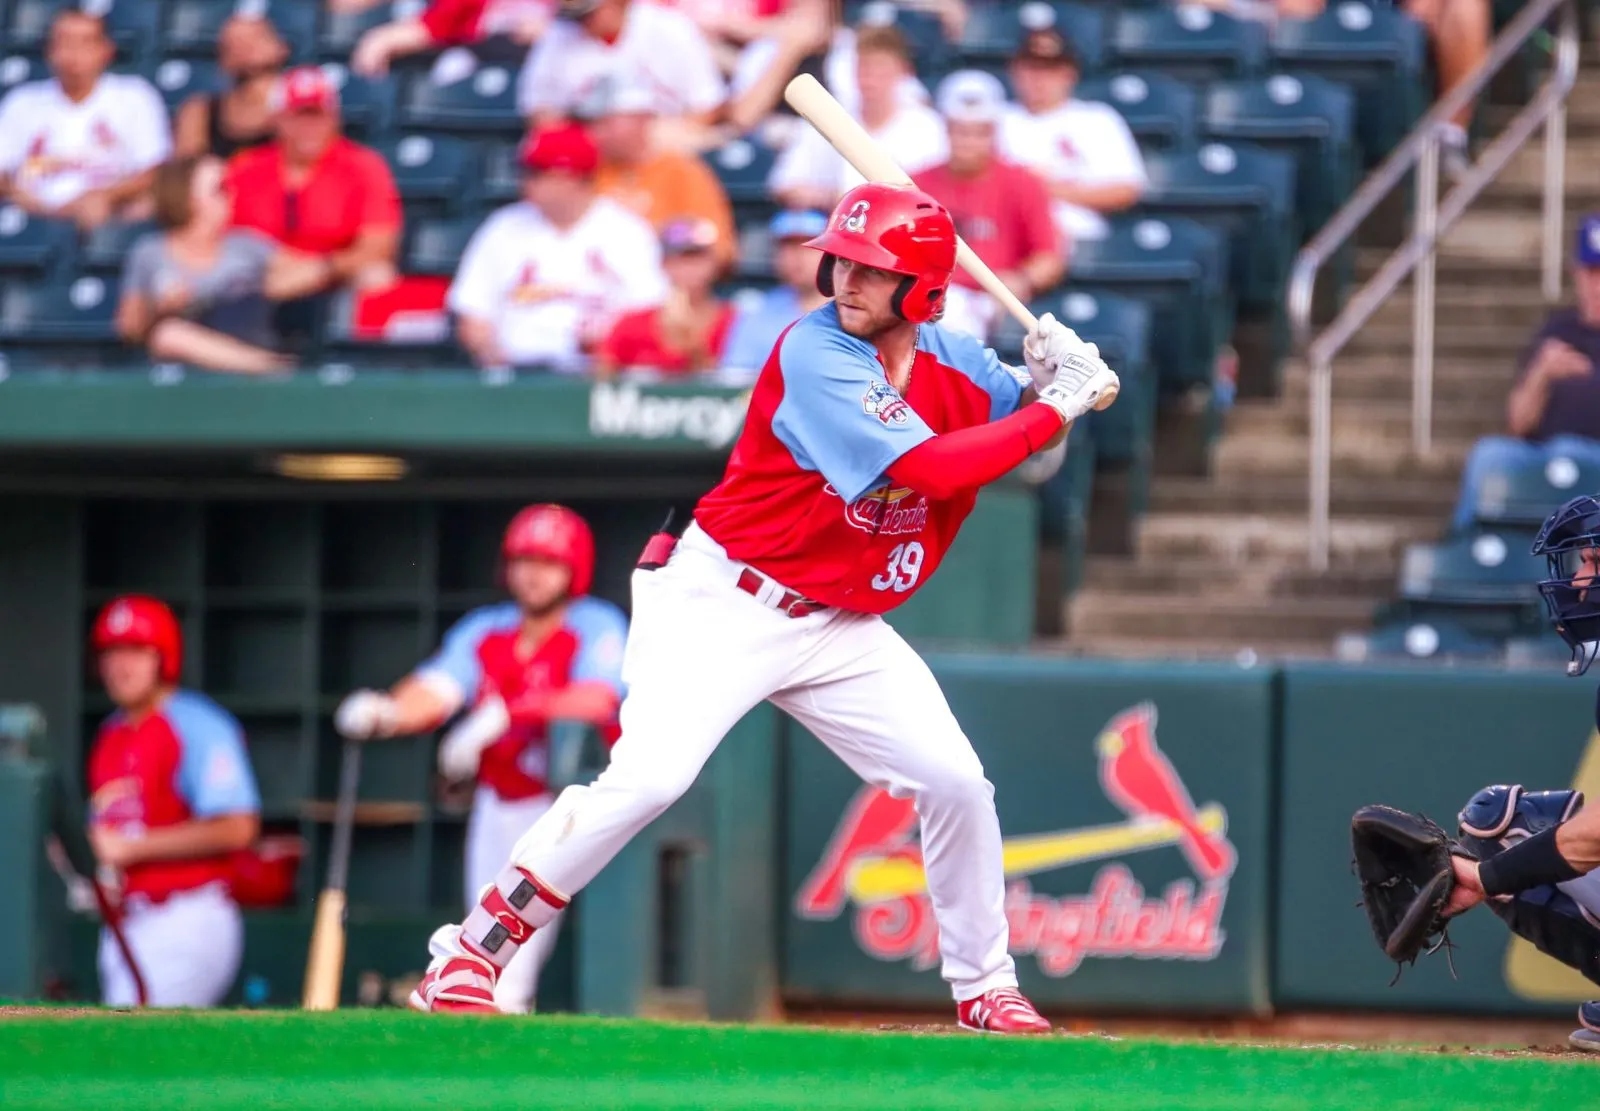 Brendan Donovan, wearing a Springfield Cardinals uniform, prepares to hit the ball during a game at Hammons Field in Springfield, Missouri.